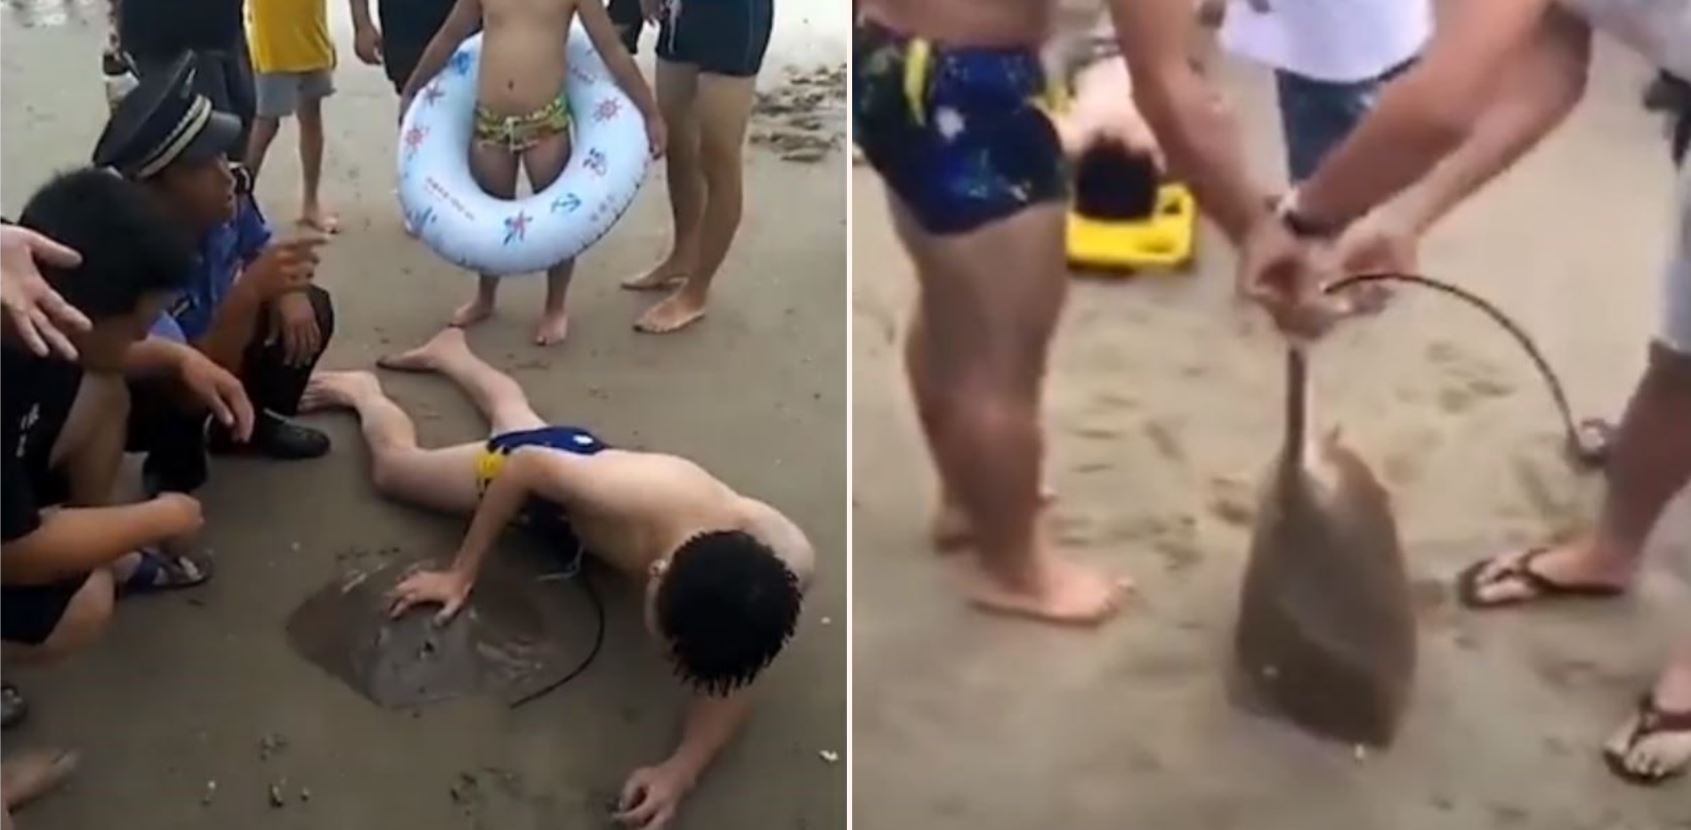 Poor bloke gets stung on the dick by stingray